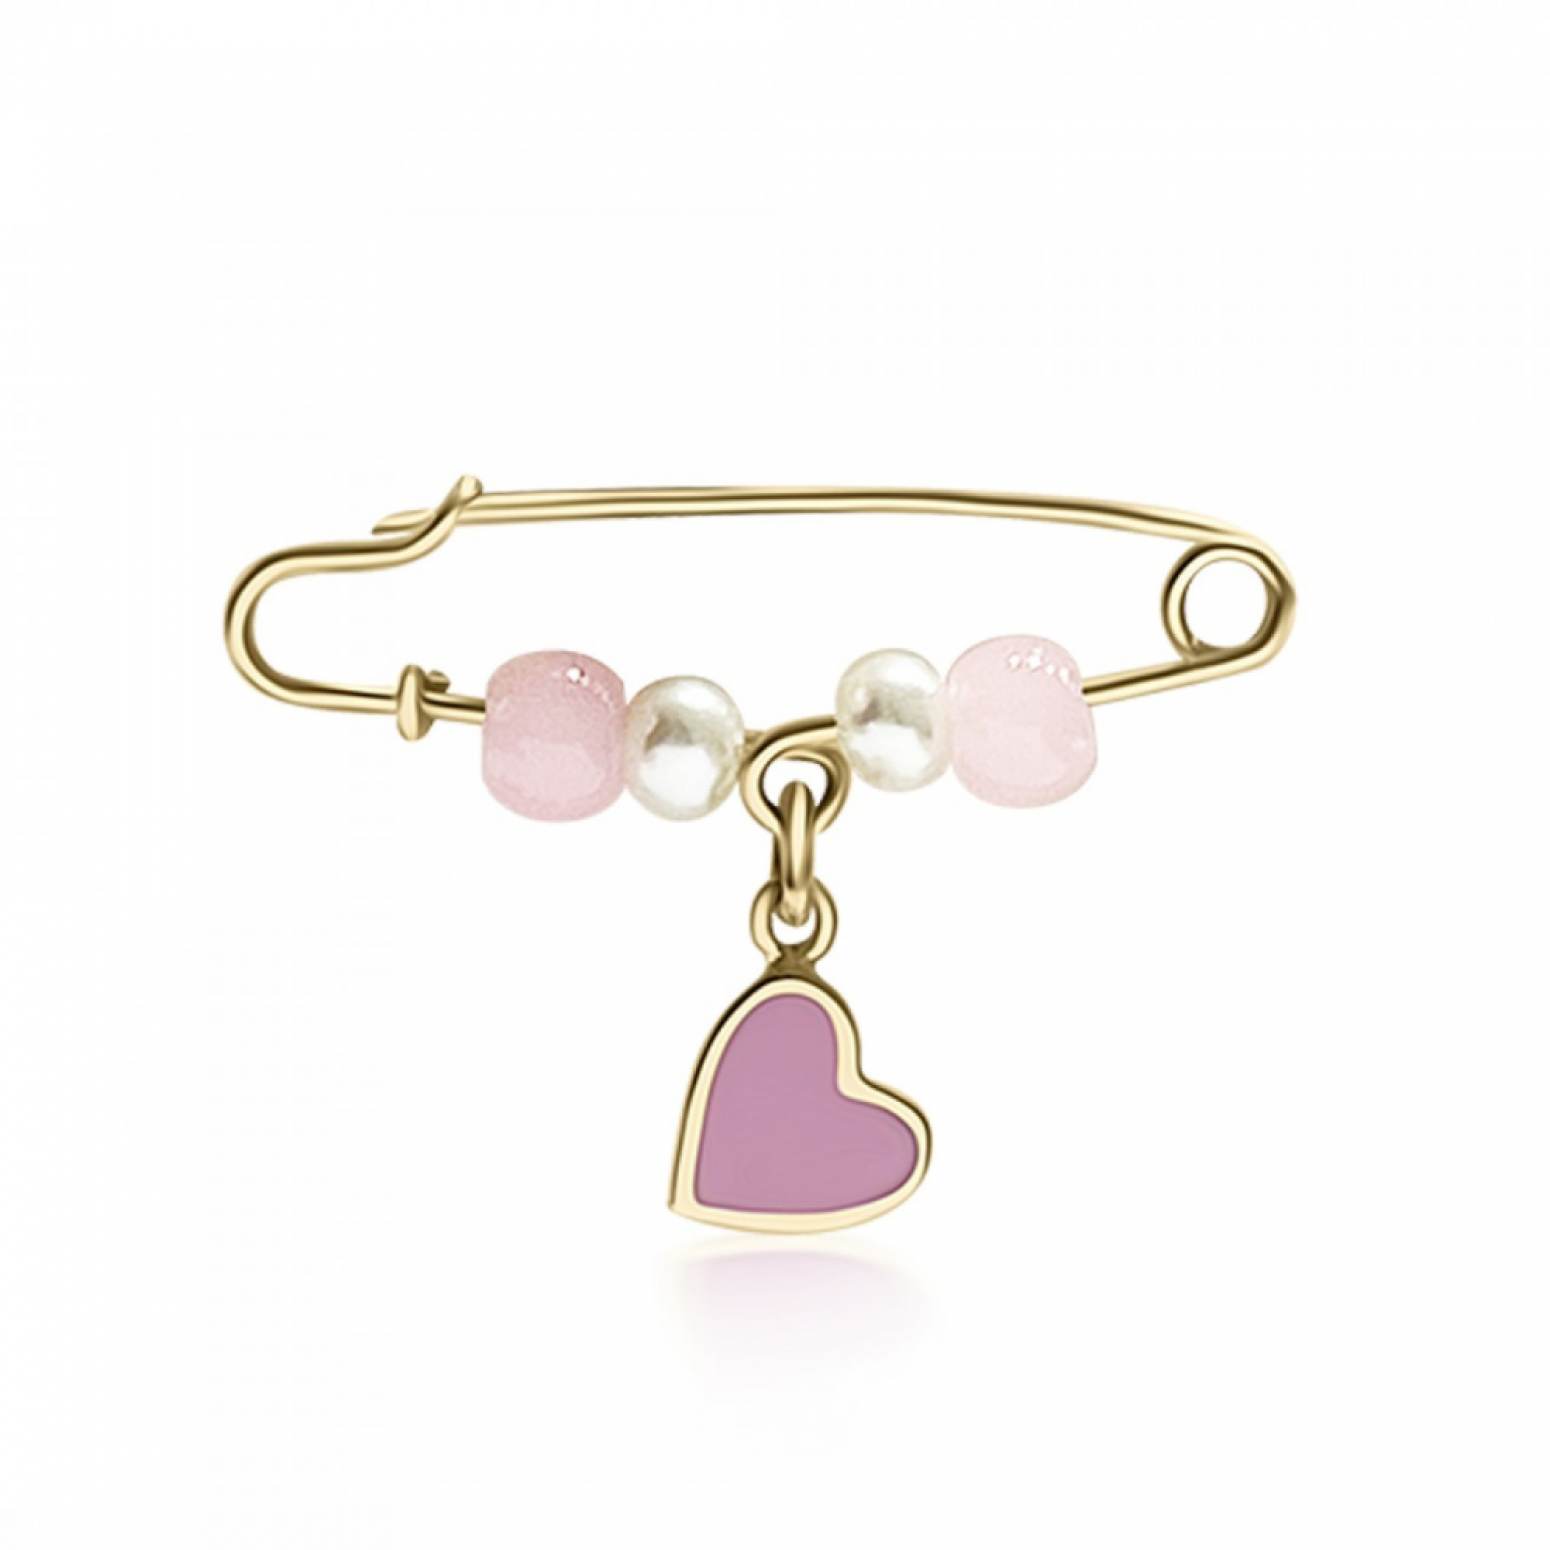 Babies pin K9 pink gold with heart, pink quartz, white pearls and enamel, pf0189 BABIES Κοσμηματα - chrilia.gr